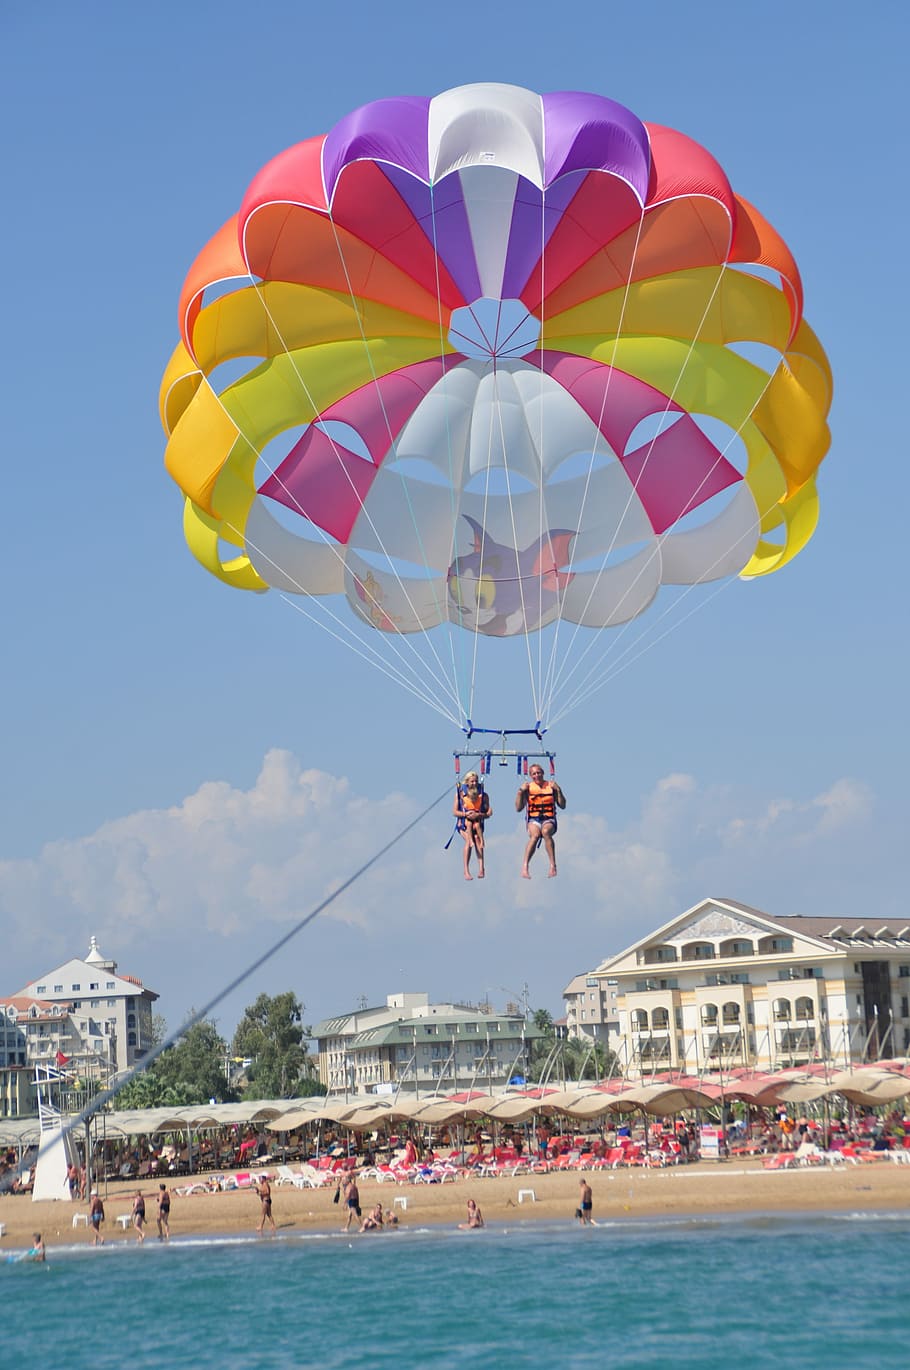 Parasailing, Beach, Holiday, beach holiday, side, mid-air, large group of people, flying, adventure, fun